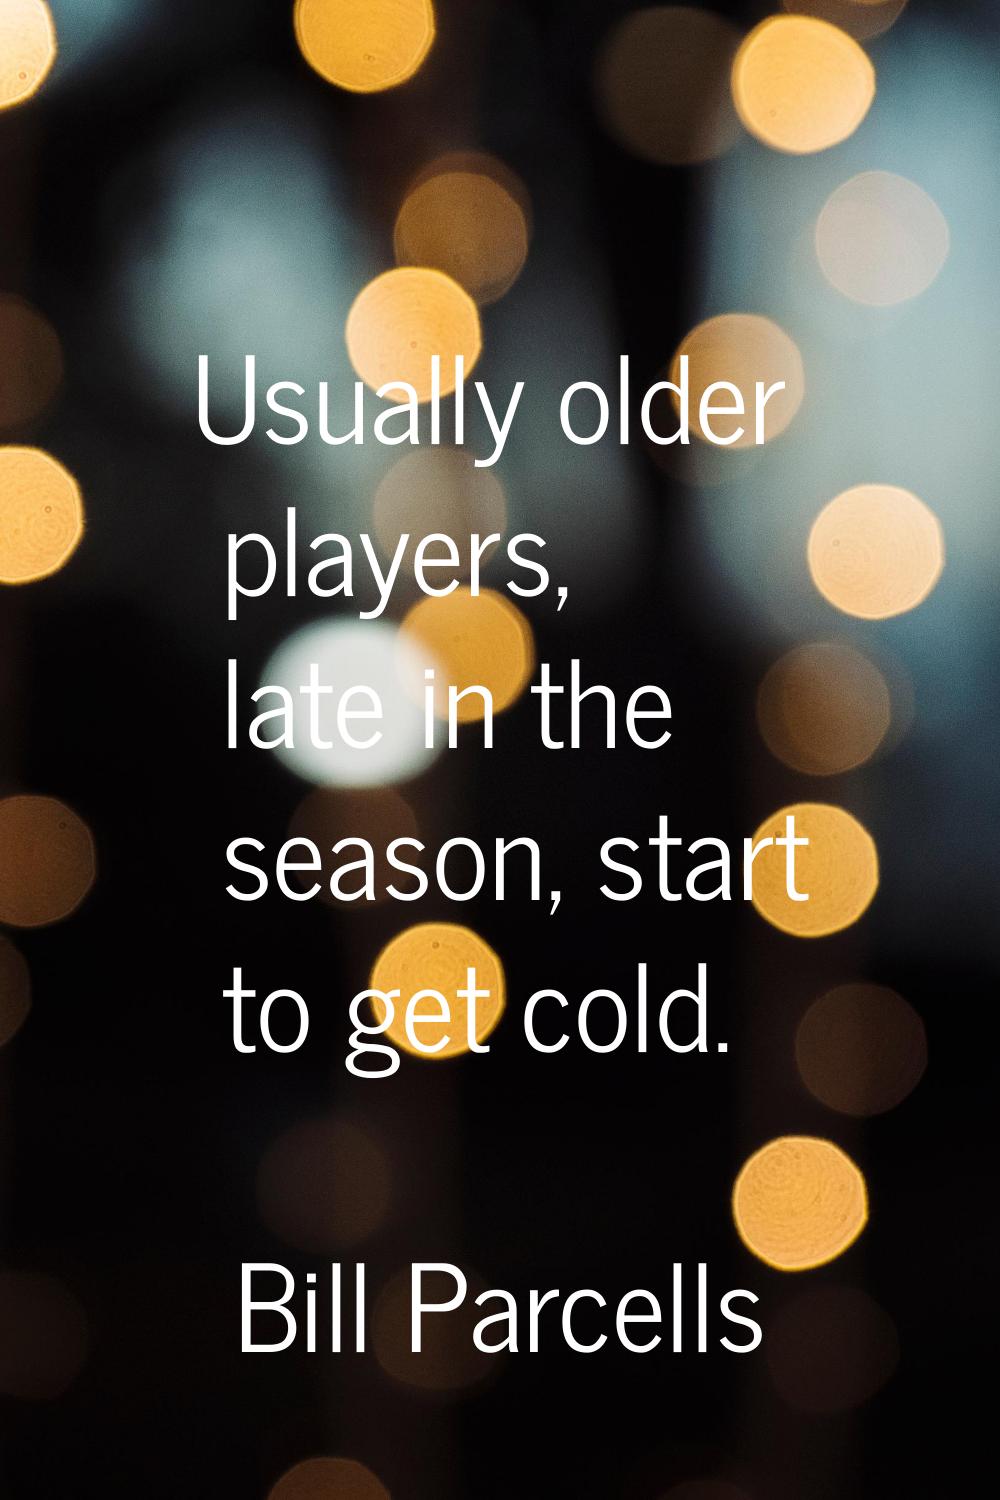 Usually older players, late in the season, start to get cold.